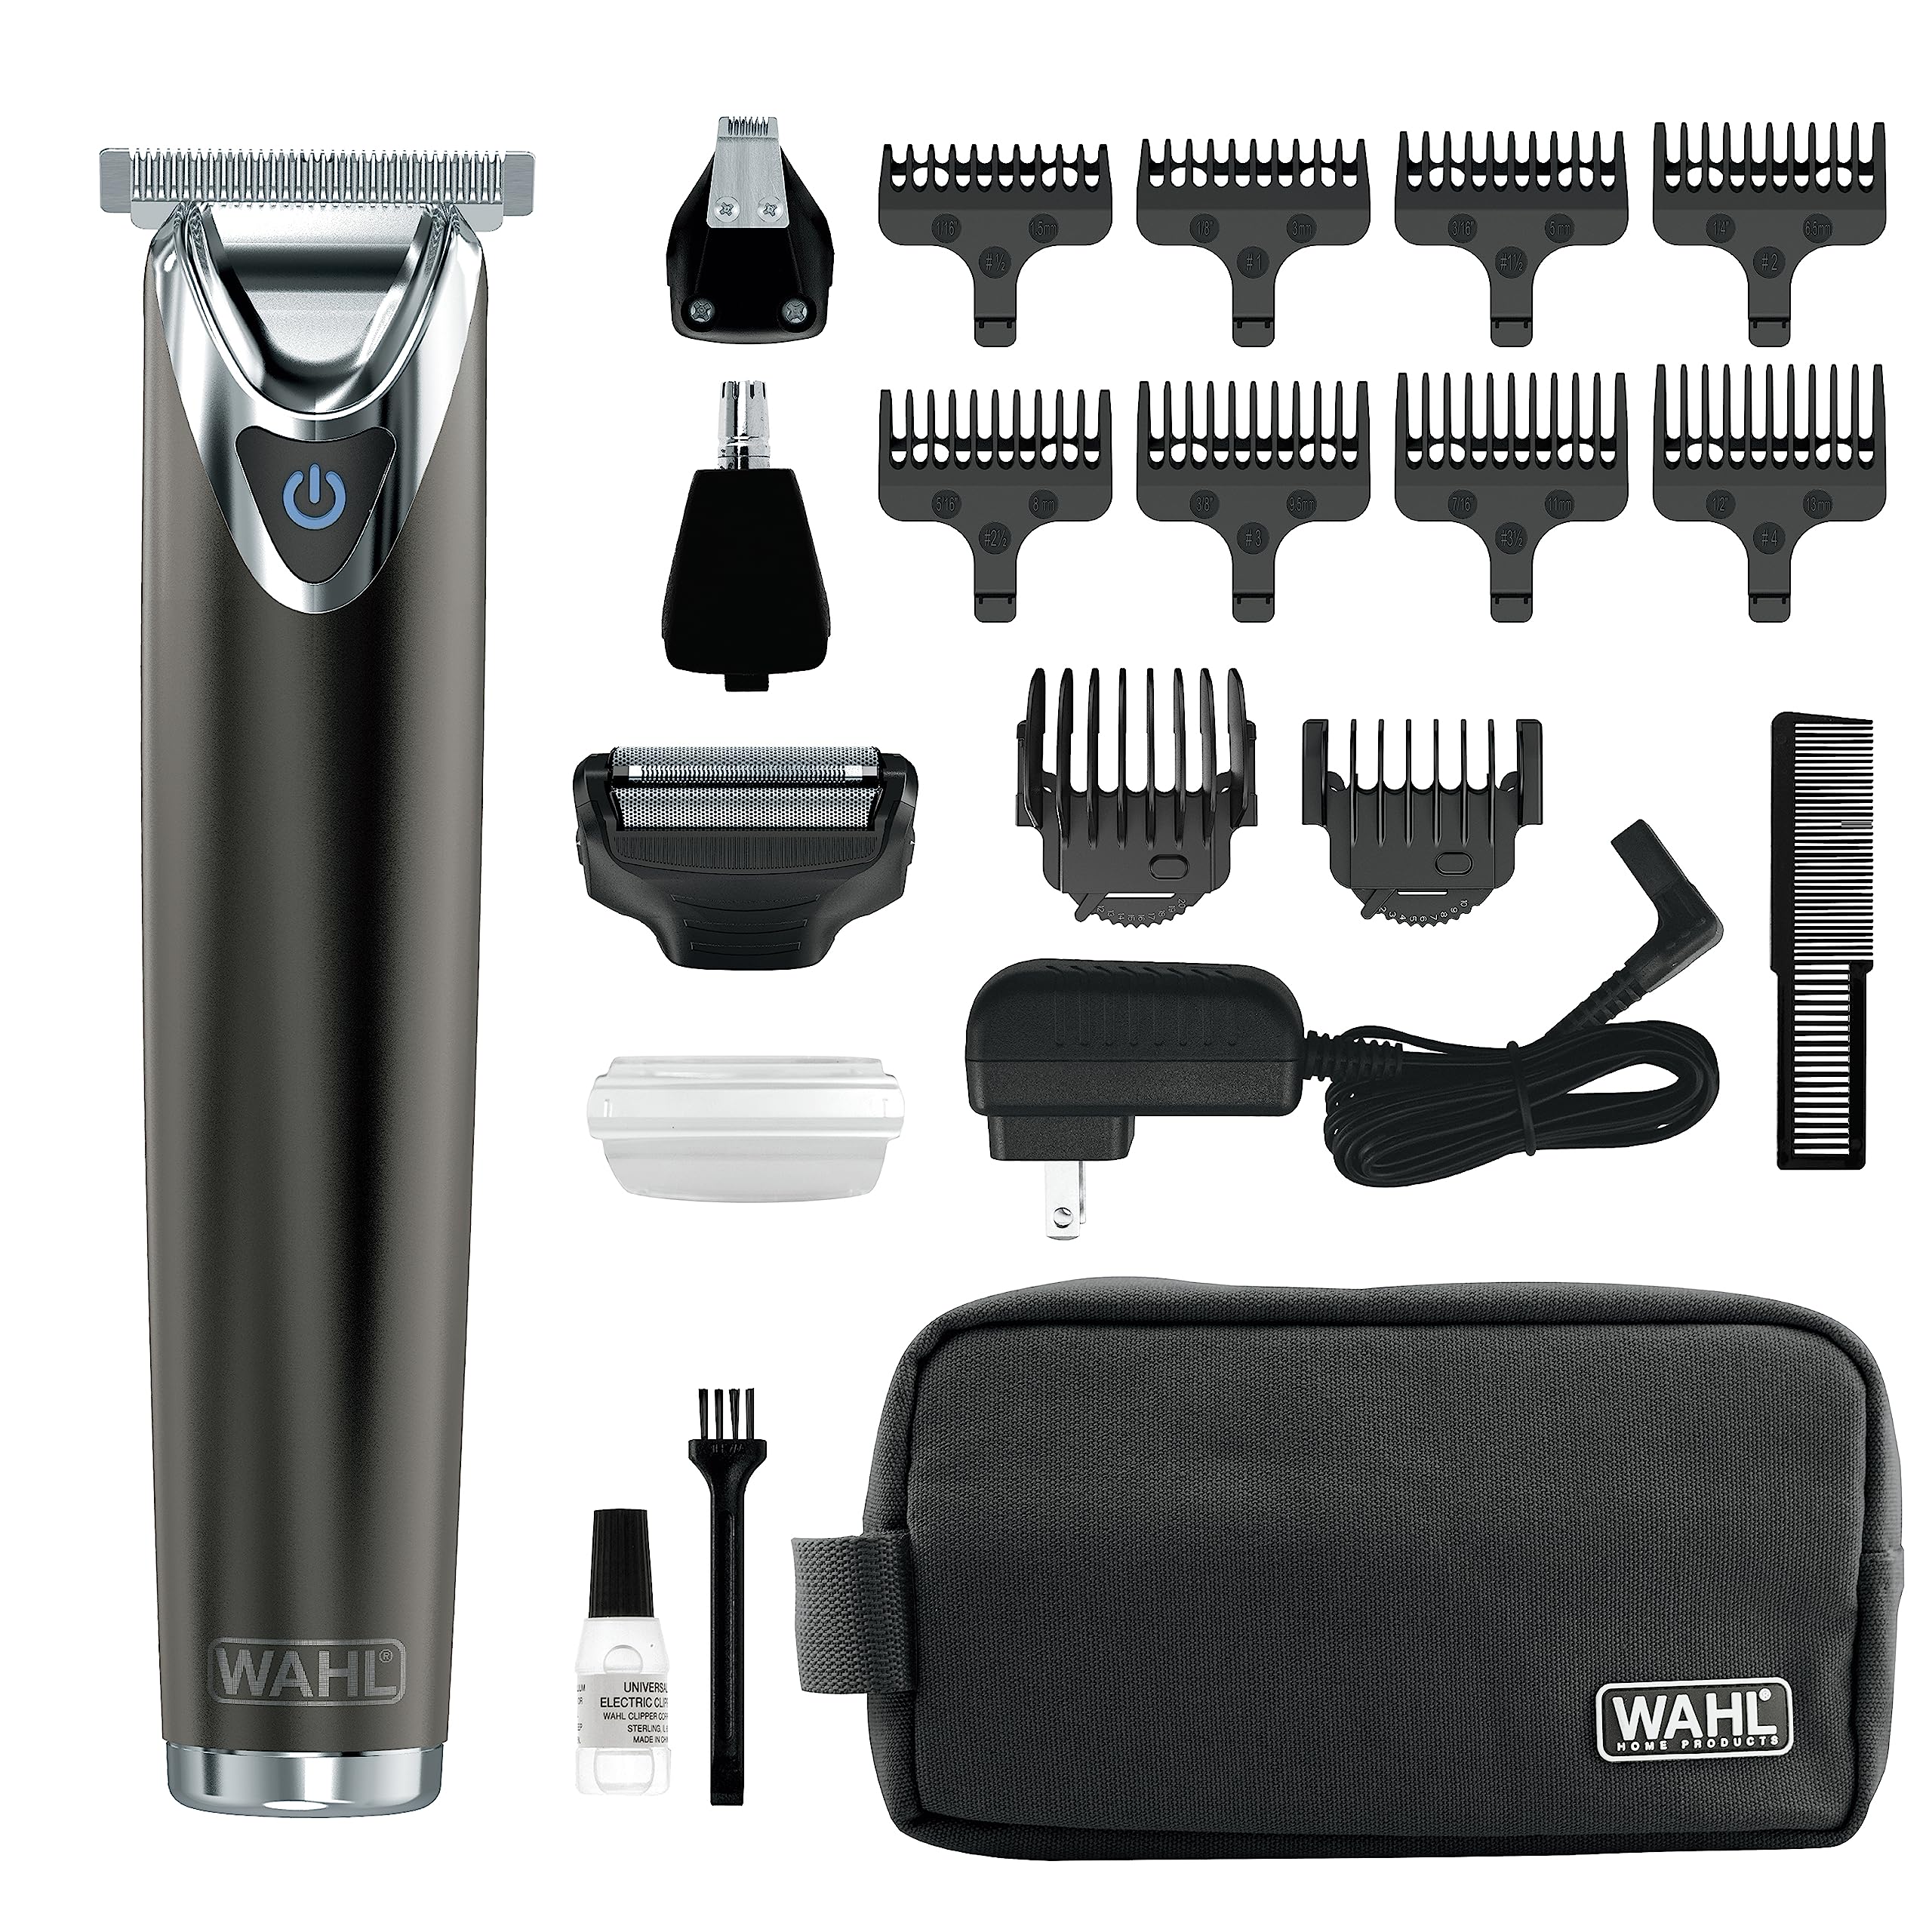 Wahl USA Stainless Steel Lithium Ion 2.0+ Slate Beard Trimmer for Men - Electric Shaver, Nose Ear Trimmer, Rechargeable All in One Men's Grooming Kit - Model 9864